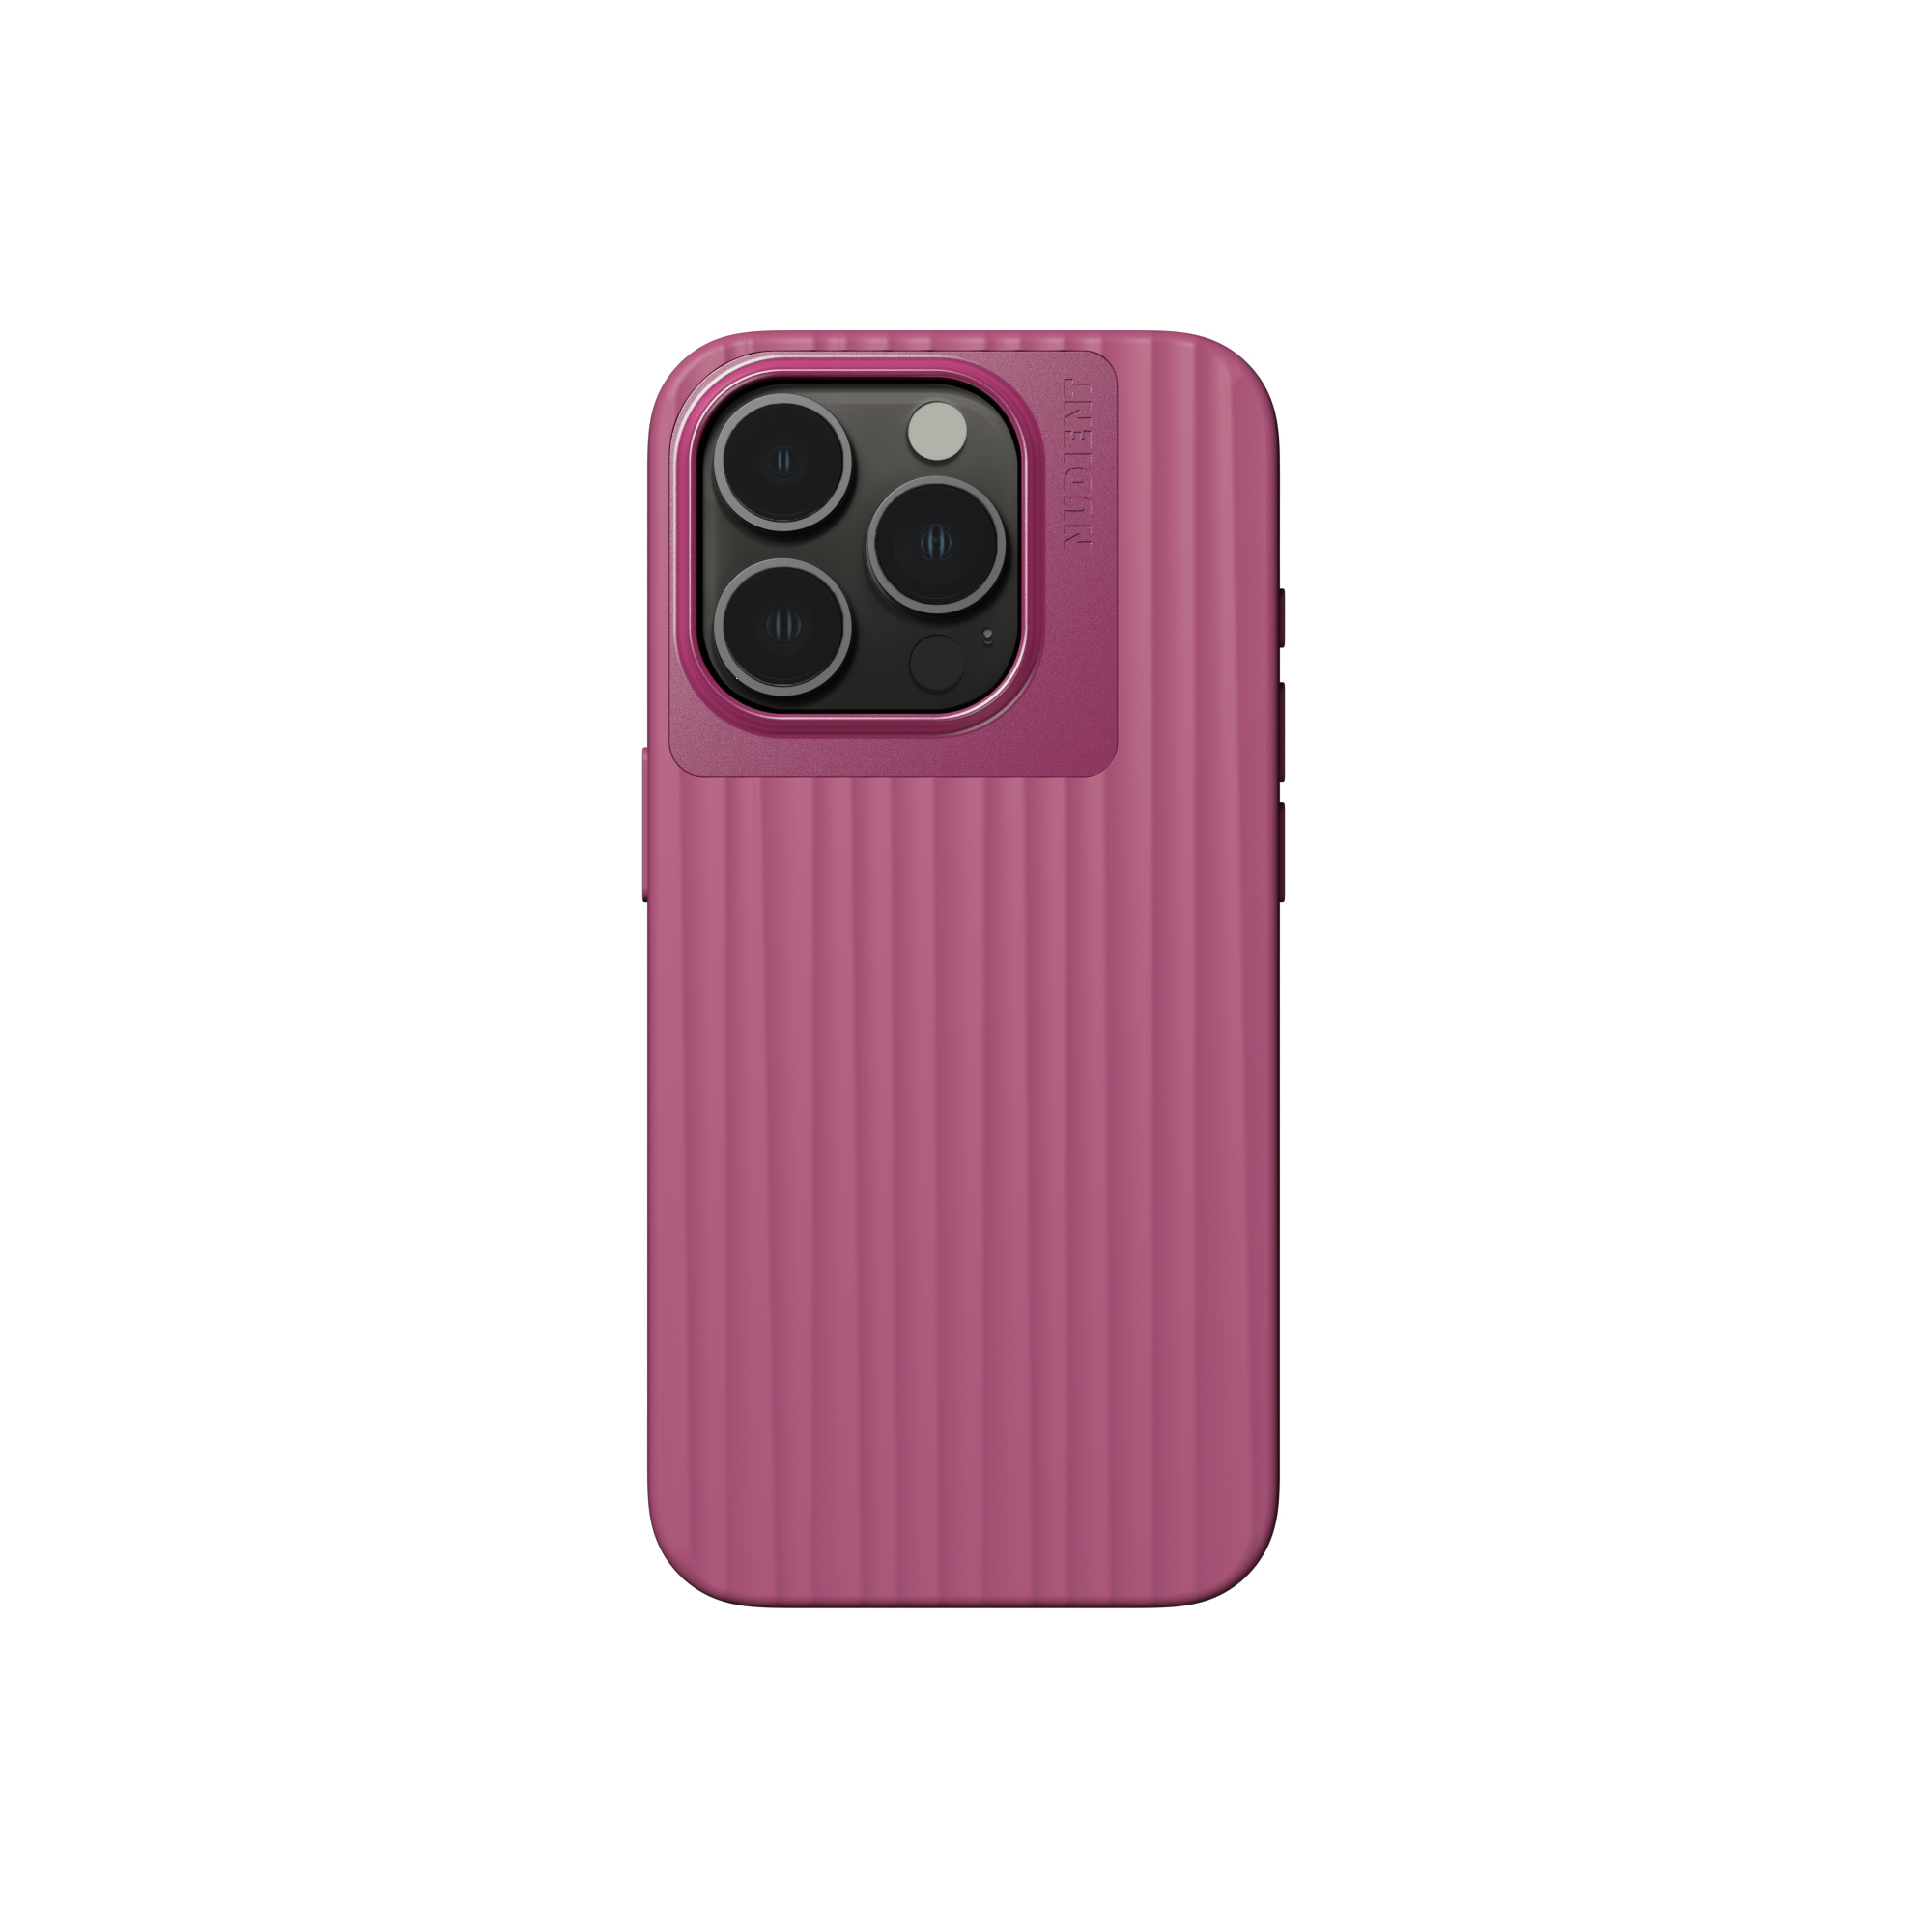 15 PRO, PINK APPLE, IPHONE Backcover, Bold, NUDIENT